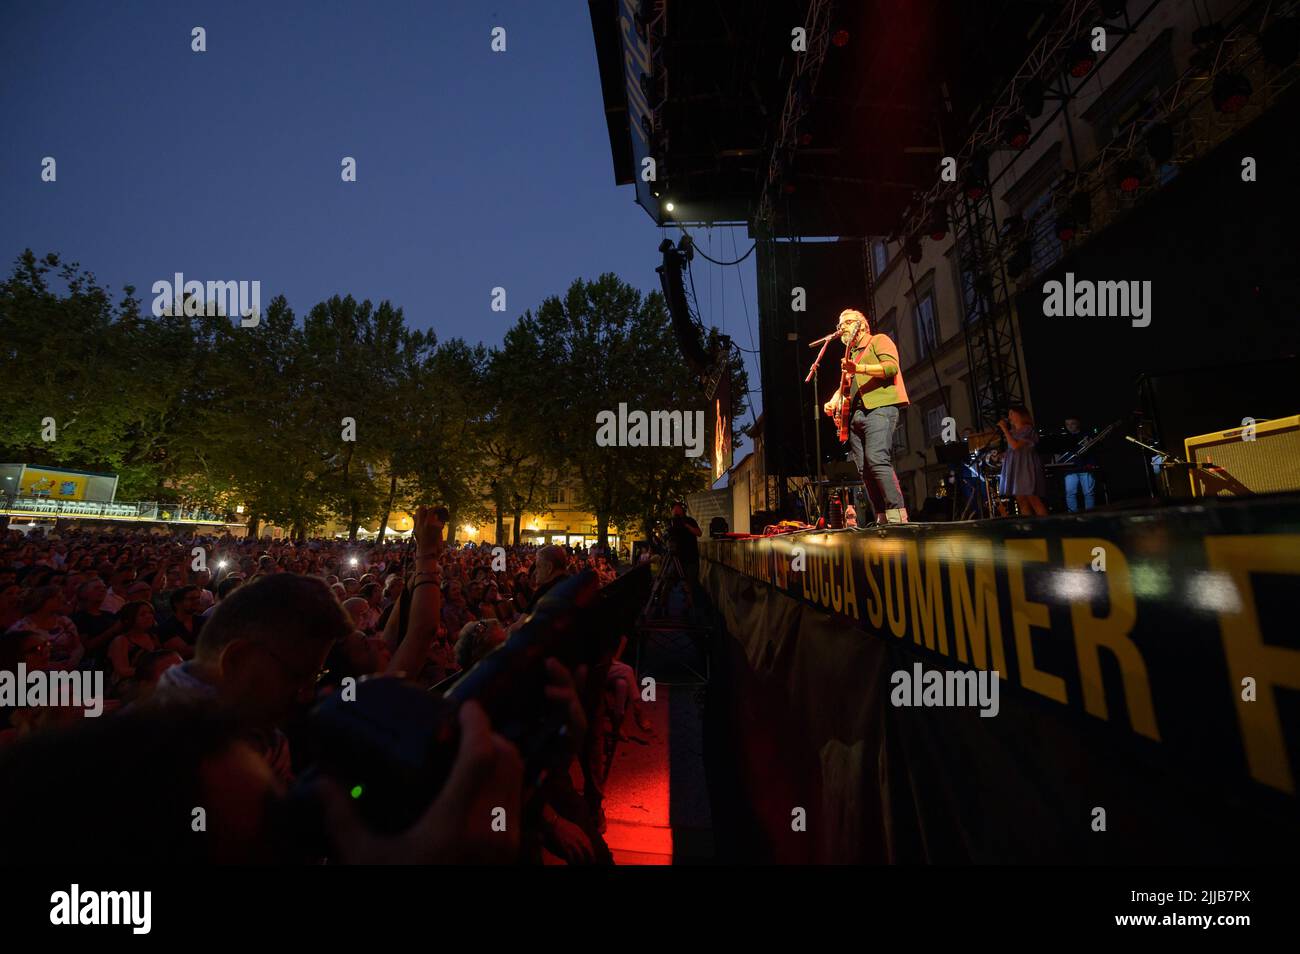 LUCCA, Italy. 24th July, 2022. Brunori sas performs in lucca in the piazza napoleone full of people during the lucca summer festival. Credit: Stefano Dalle Luche/Alamy Live News Stock Photo